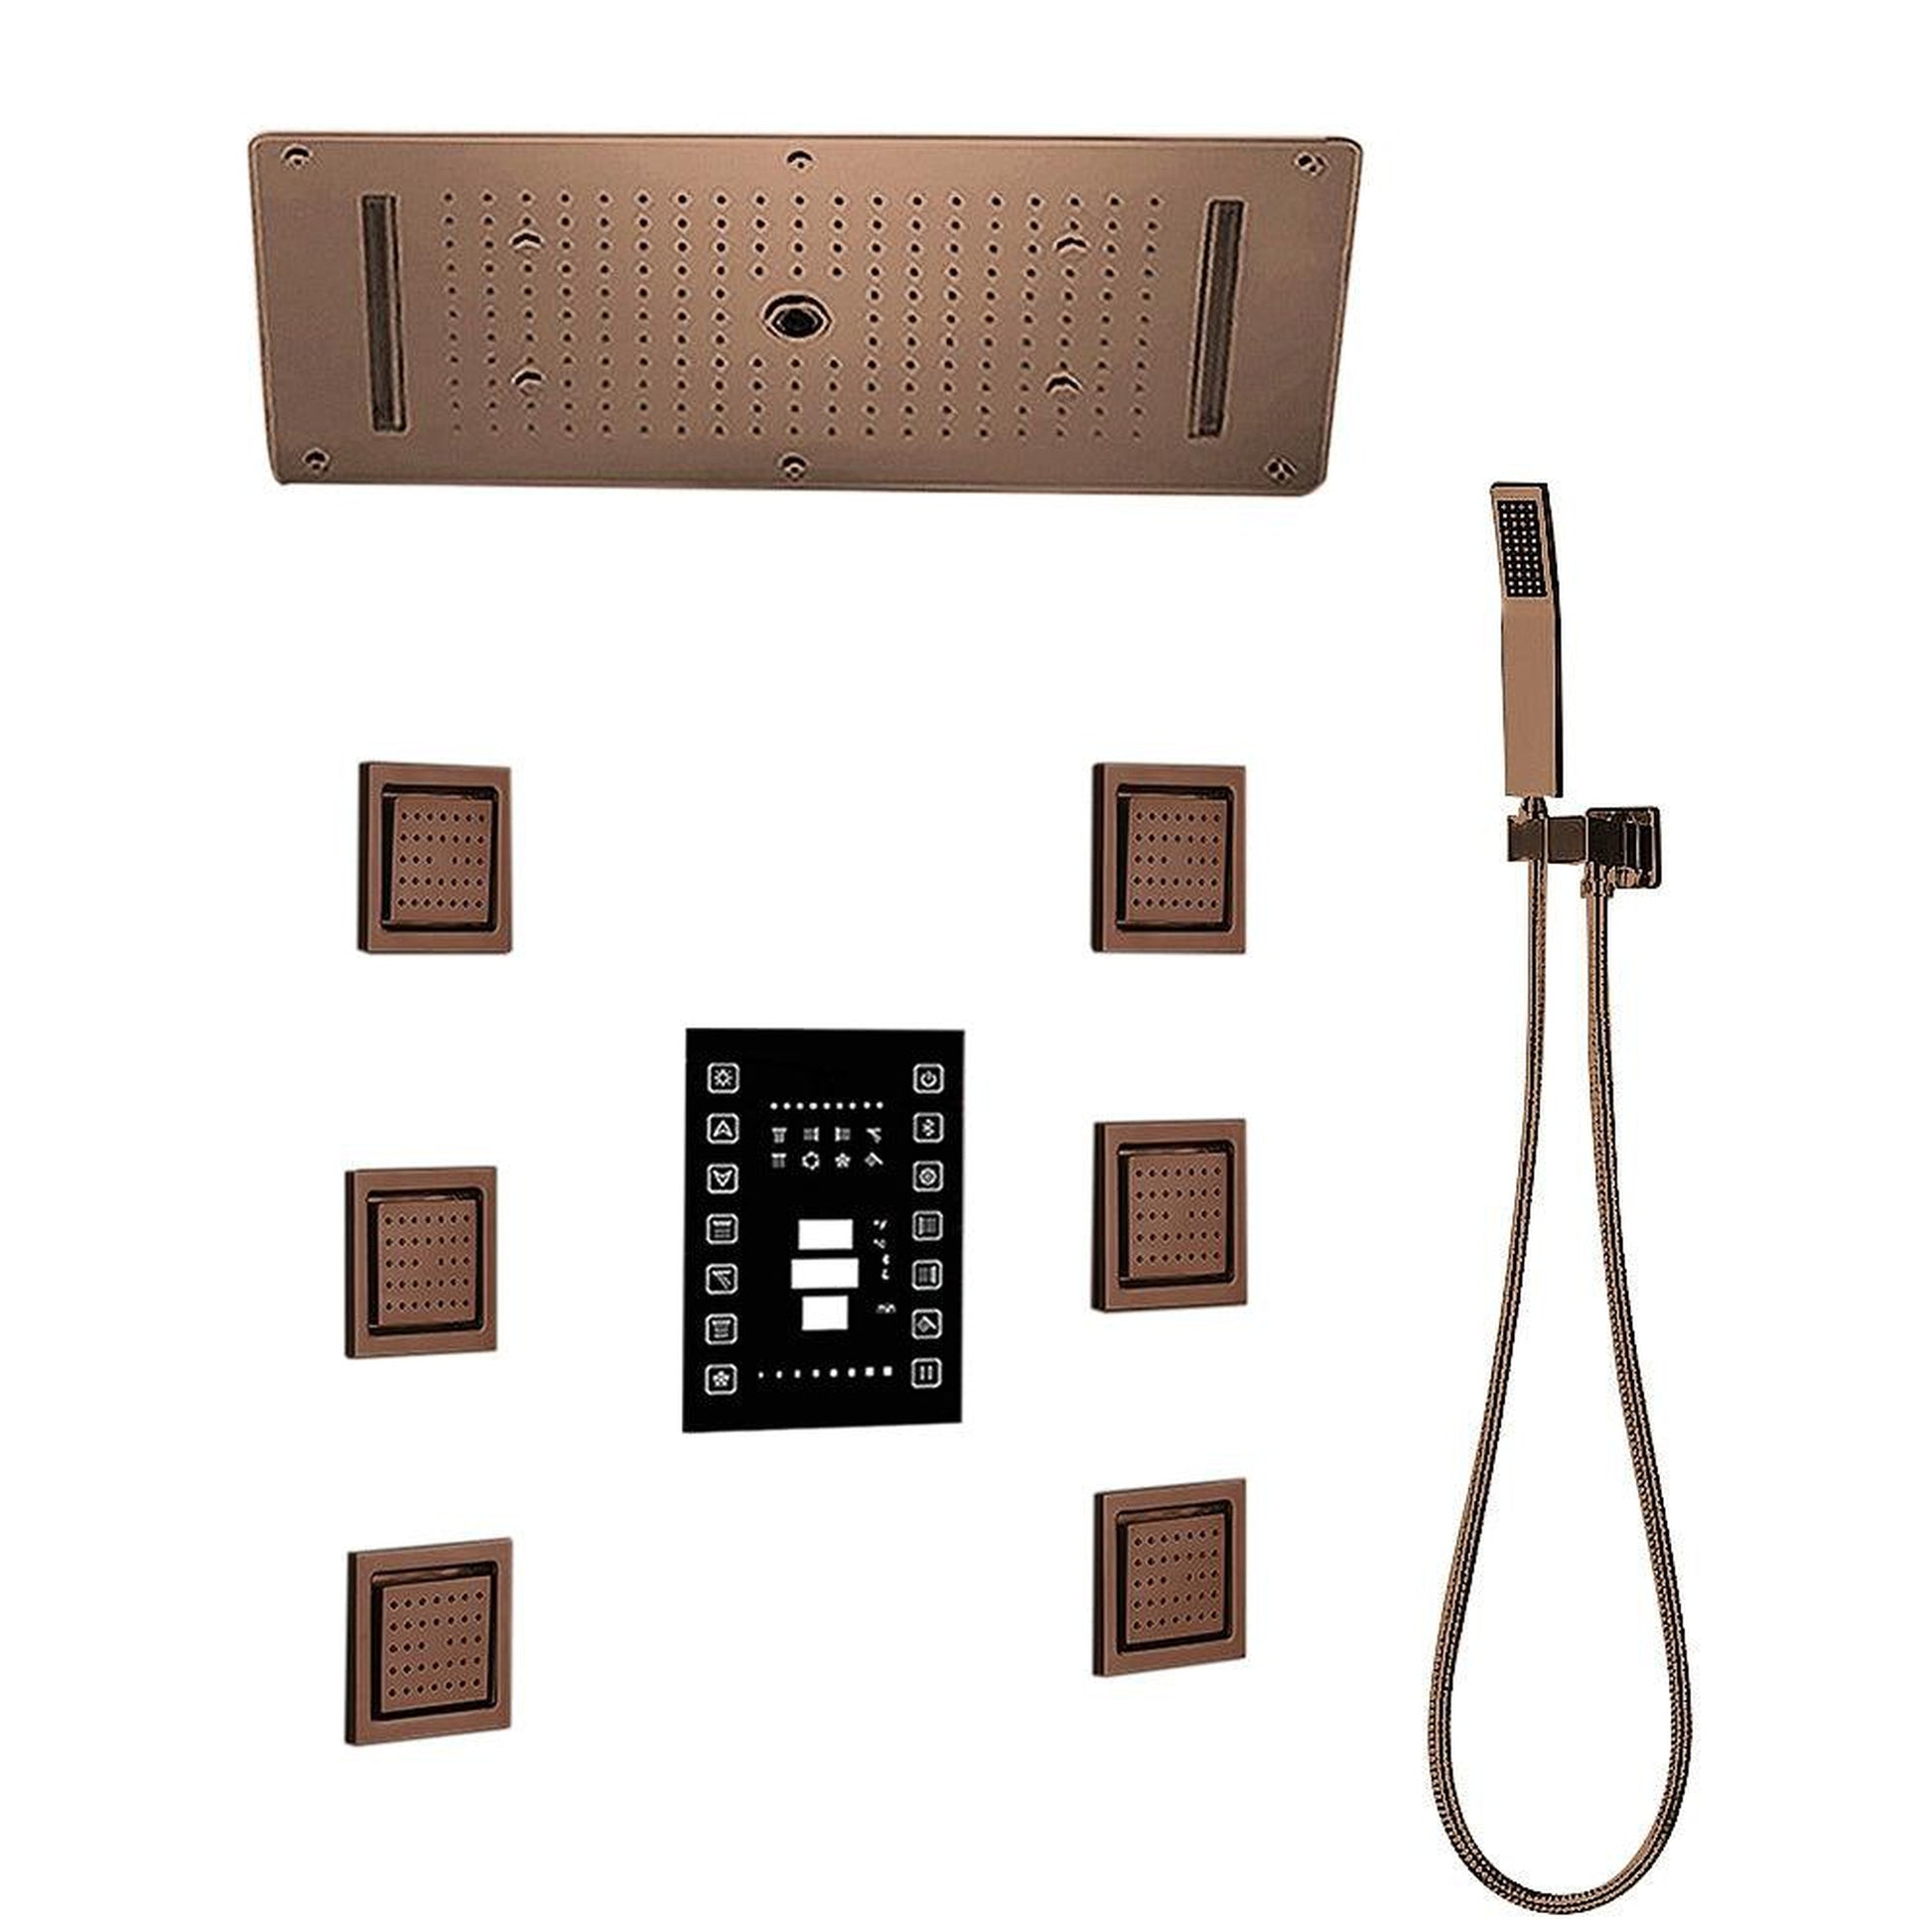 Fontana Oil Rubbed Bronze 4-Way LED Luxury Style Shower System With 6-Body Jets and Hand Shower